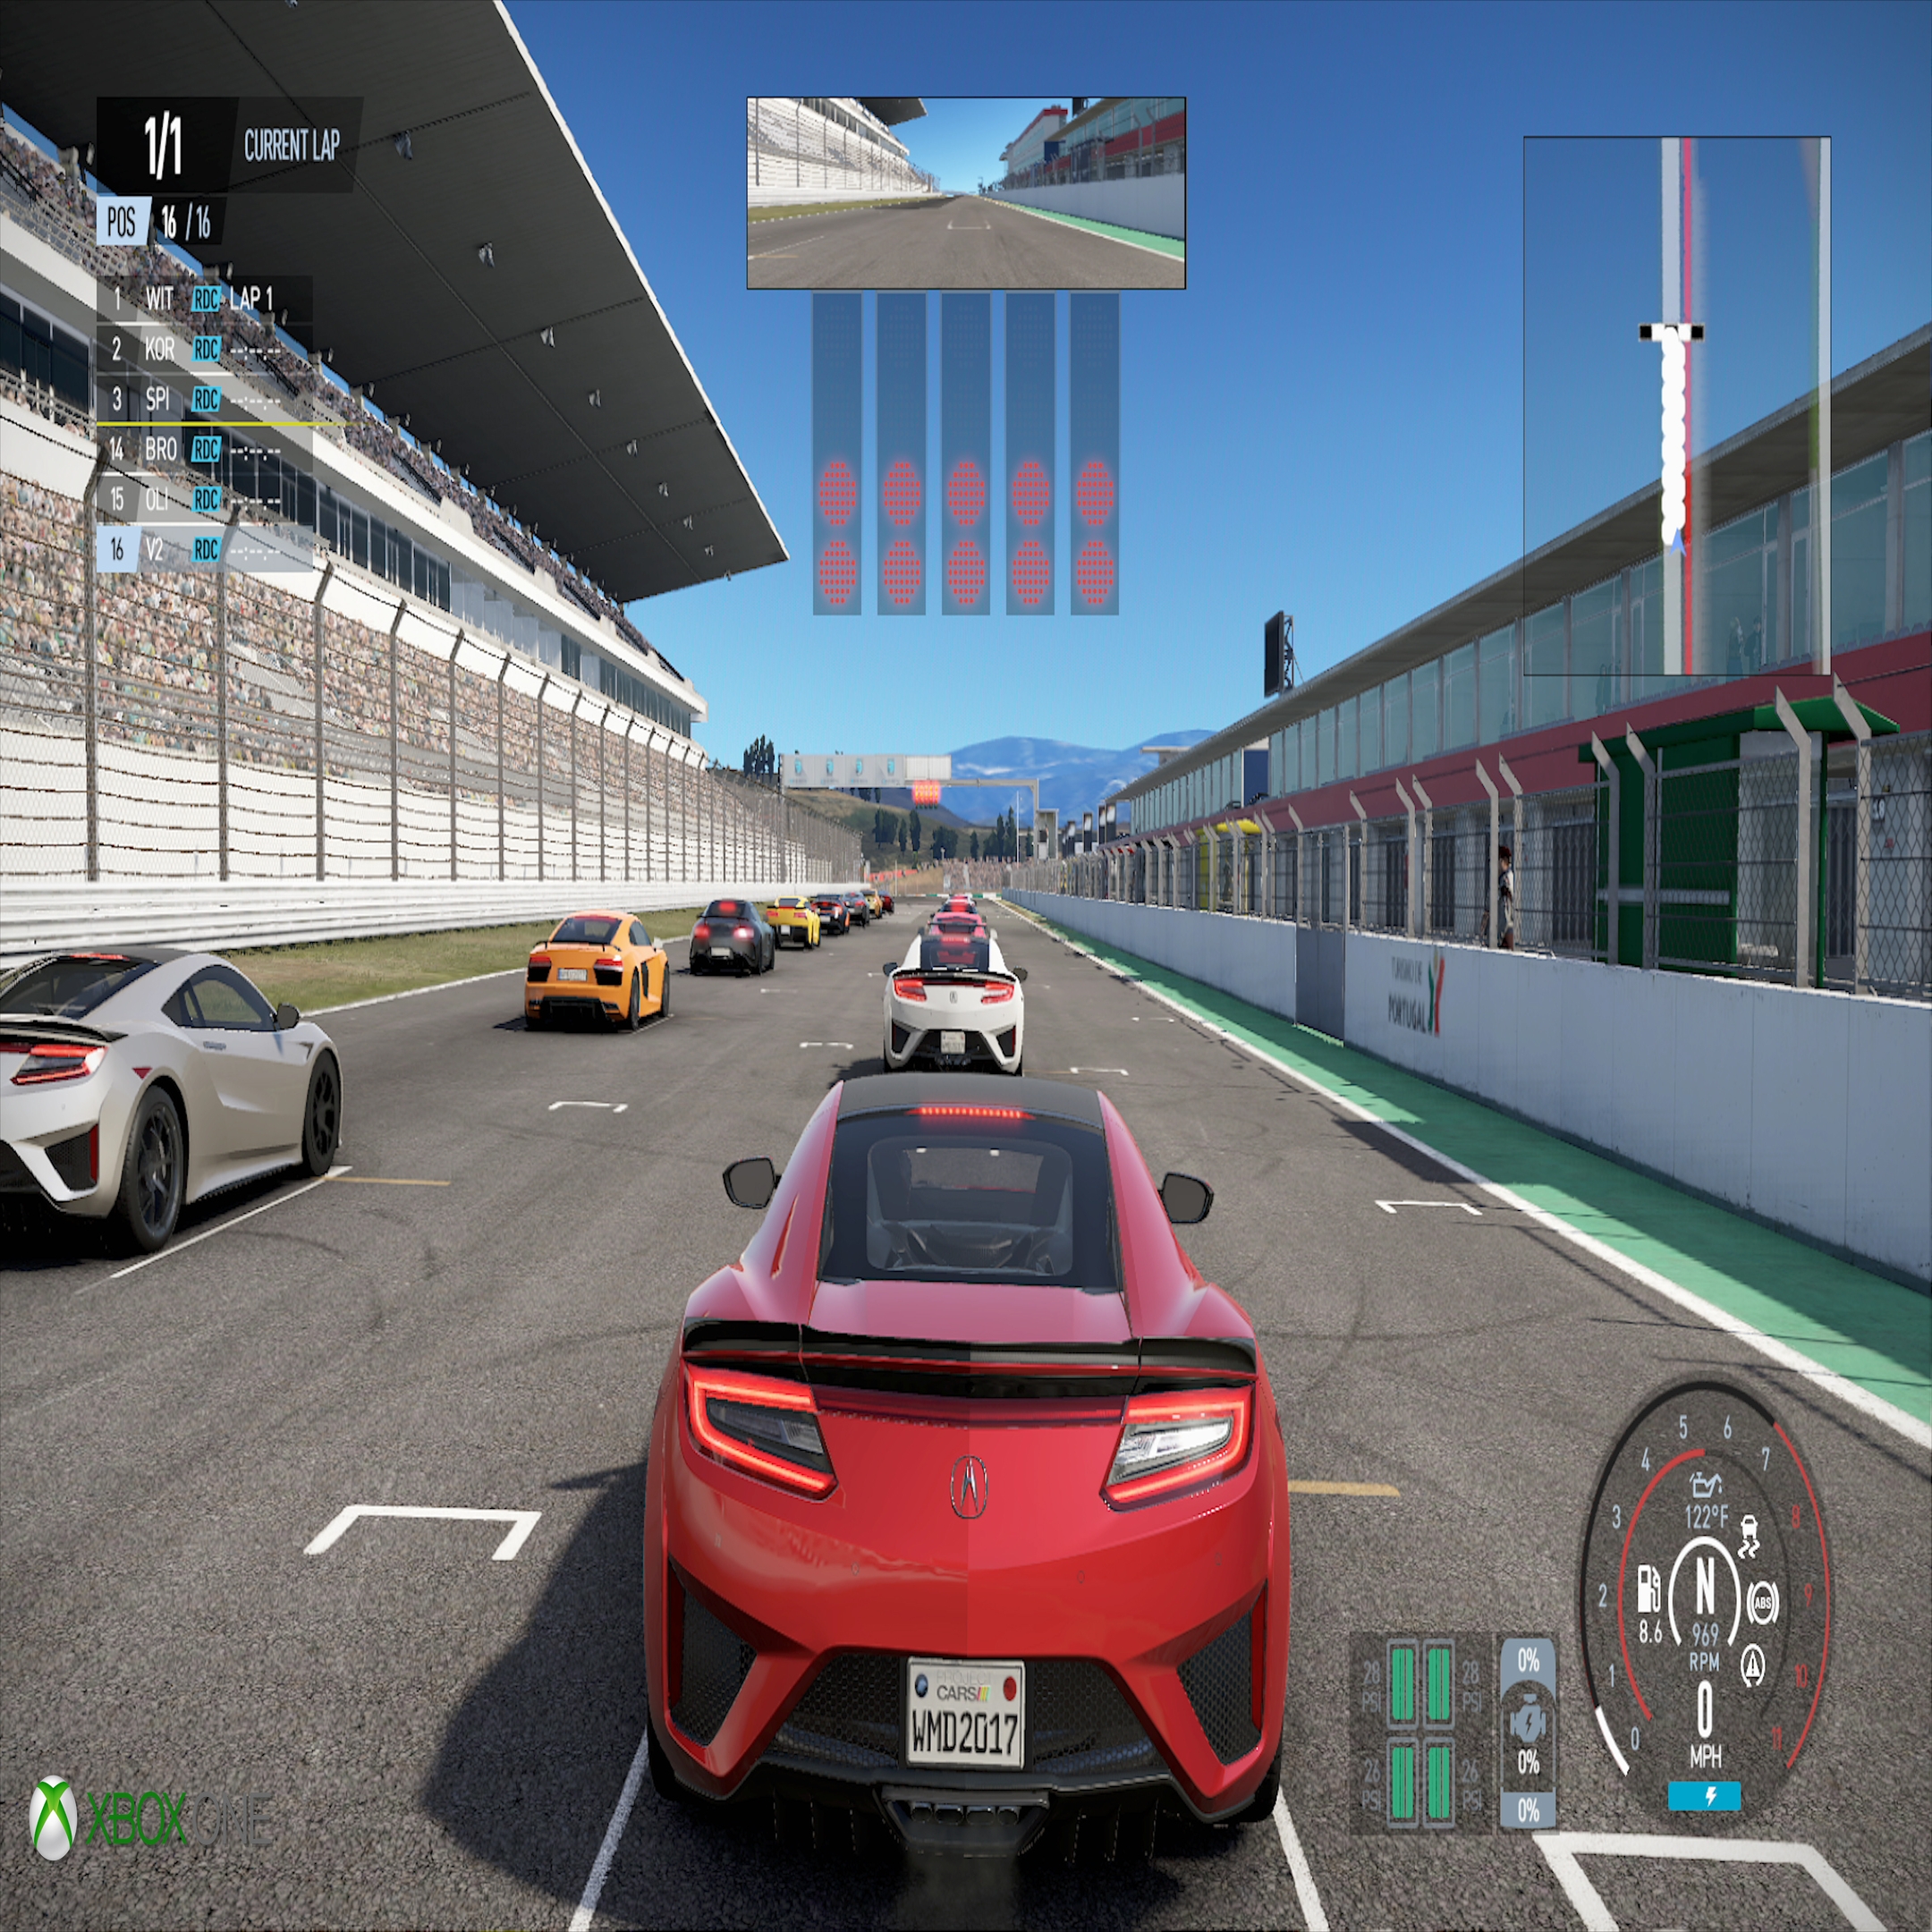  Project CARS 2 - PlayStation 4 : Video Games